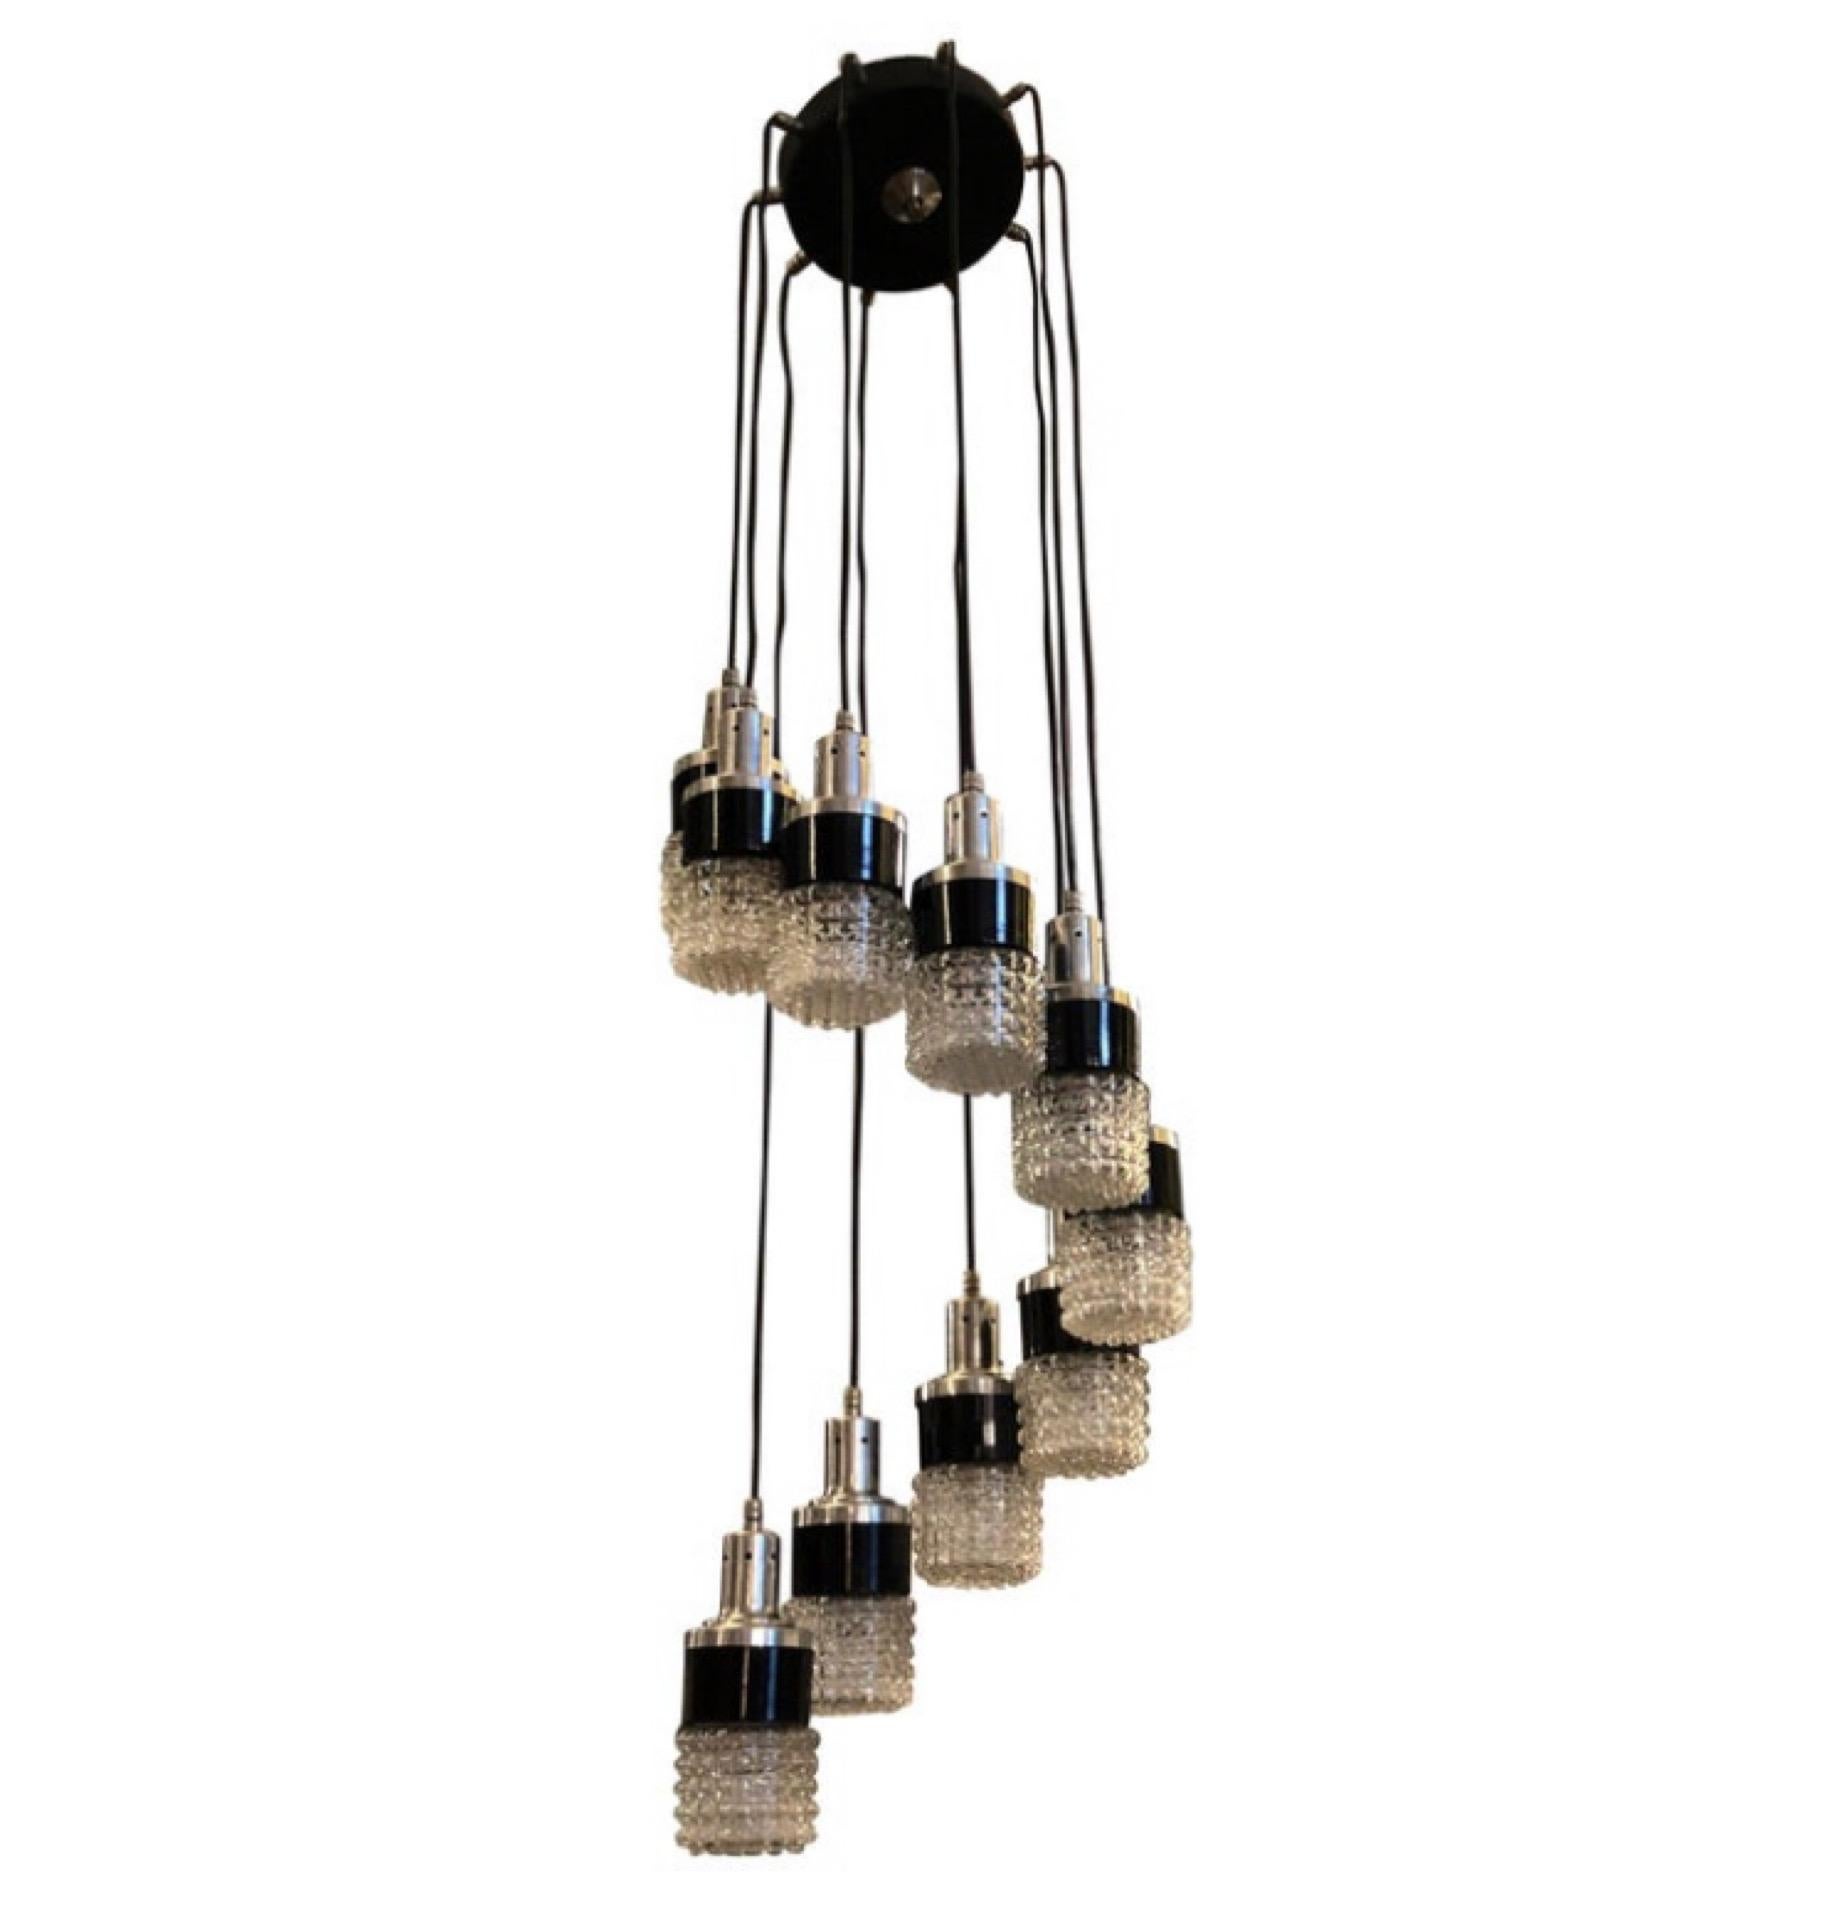 A cascading chandelier in the manner of Stilnovo designed and manufactured in Italy in the Seventies in perfect conditions. It works both 110-240 volts and needs ten regular e14 bulbs. It's a timeless and elegant lighting fixture that captures the